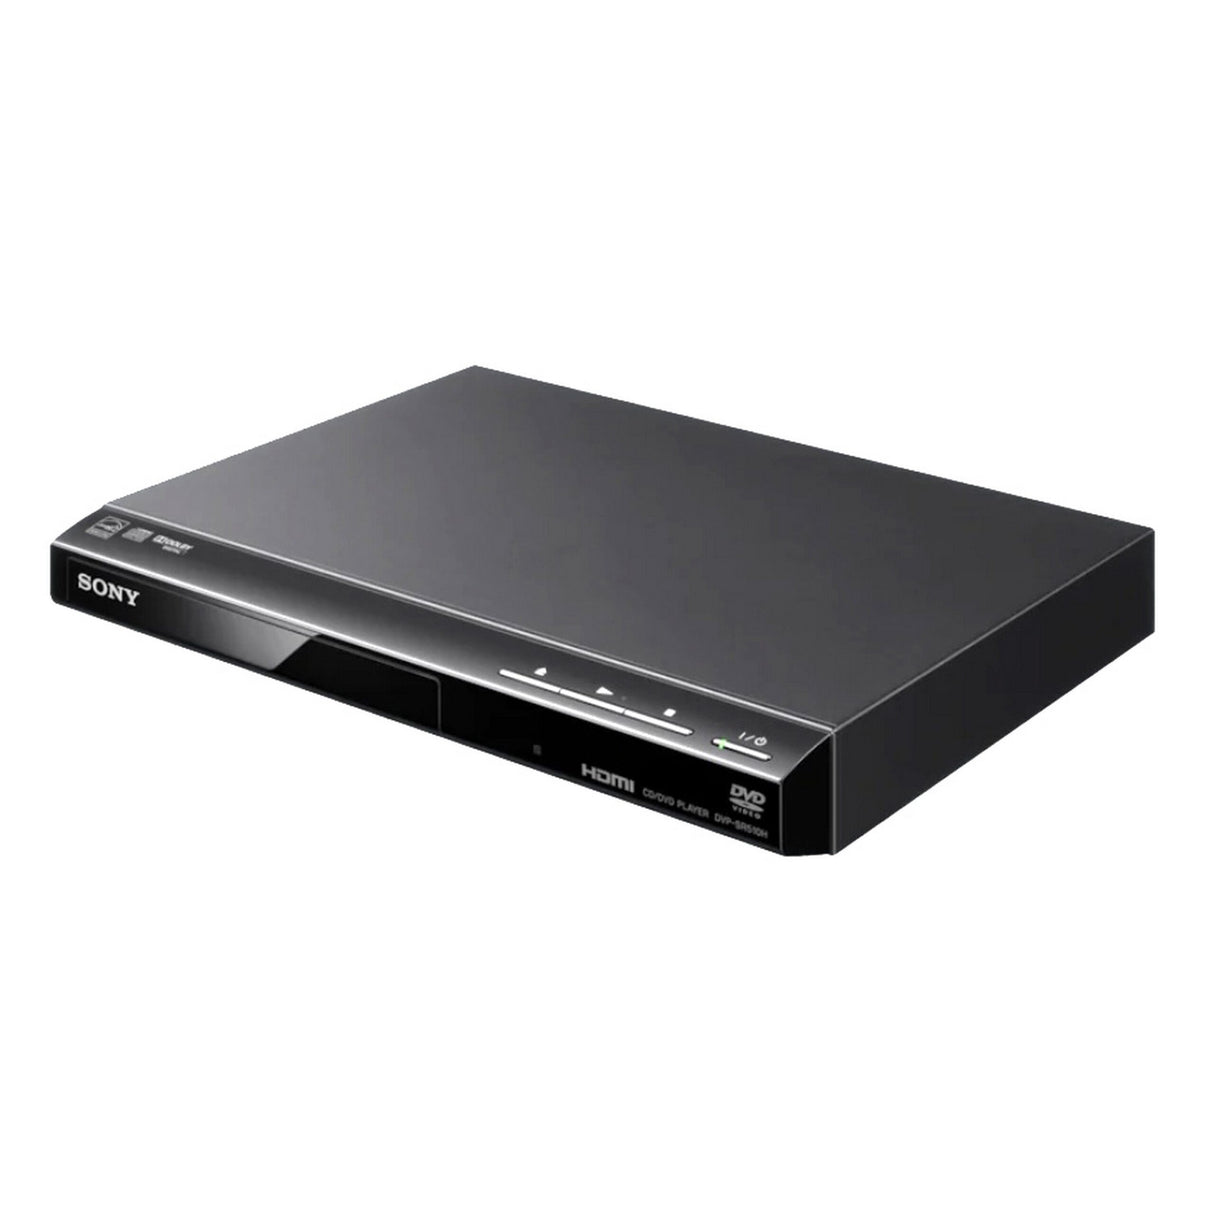 Sony DVP-SR510H DVD Player with 1080p Upscaling